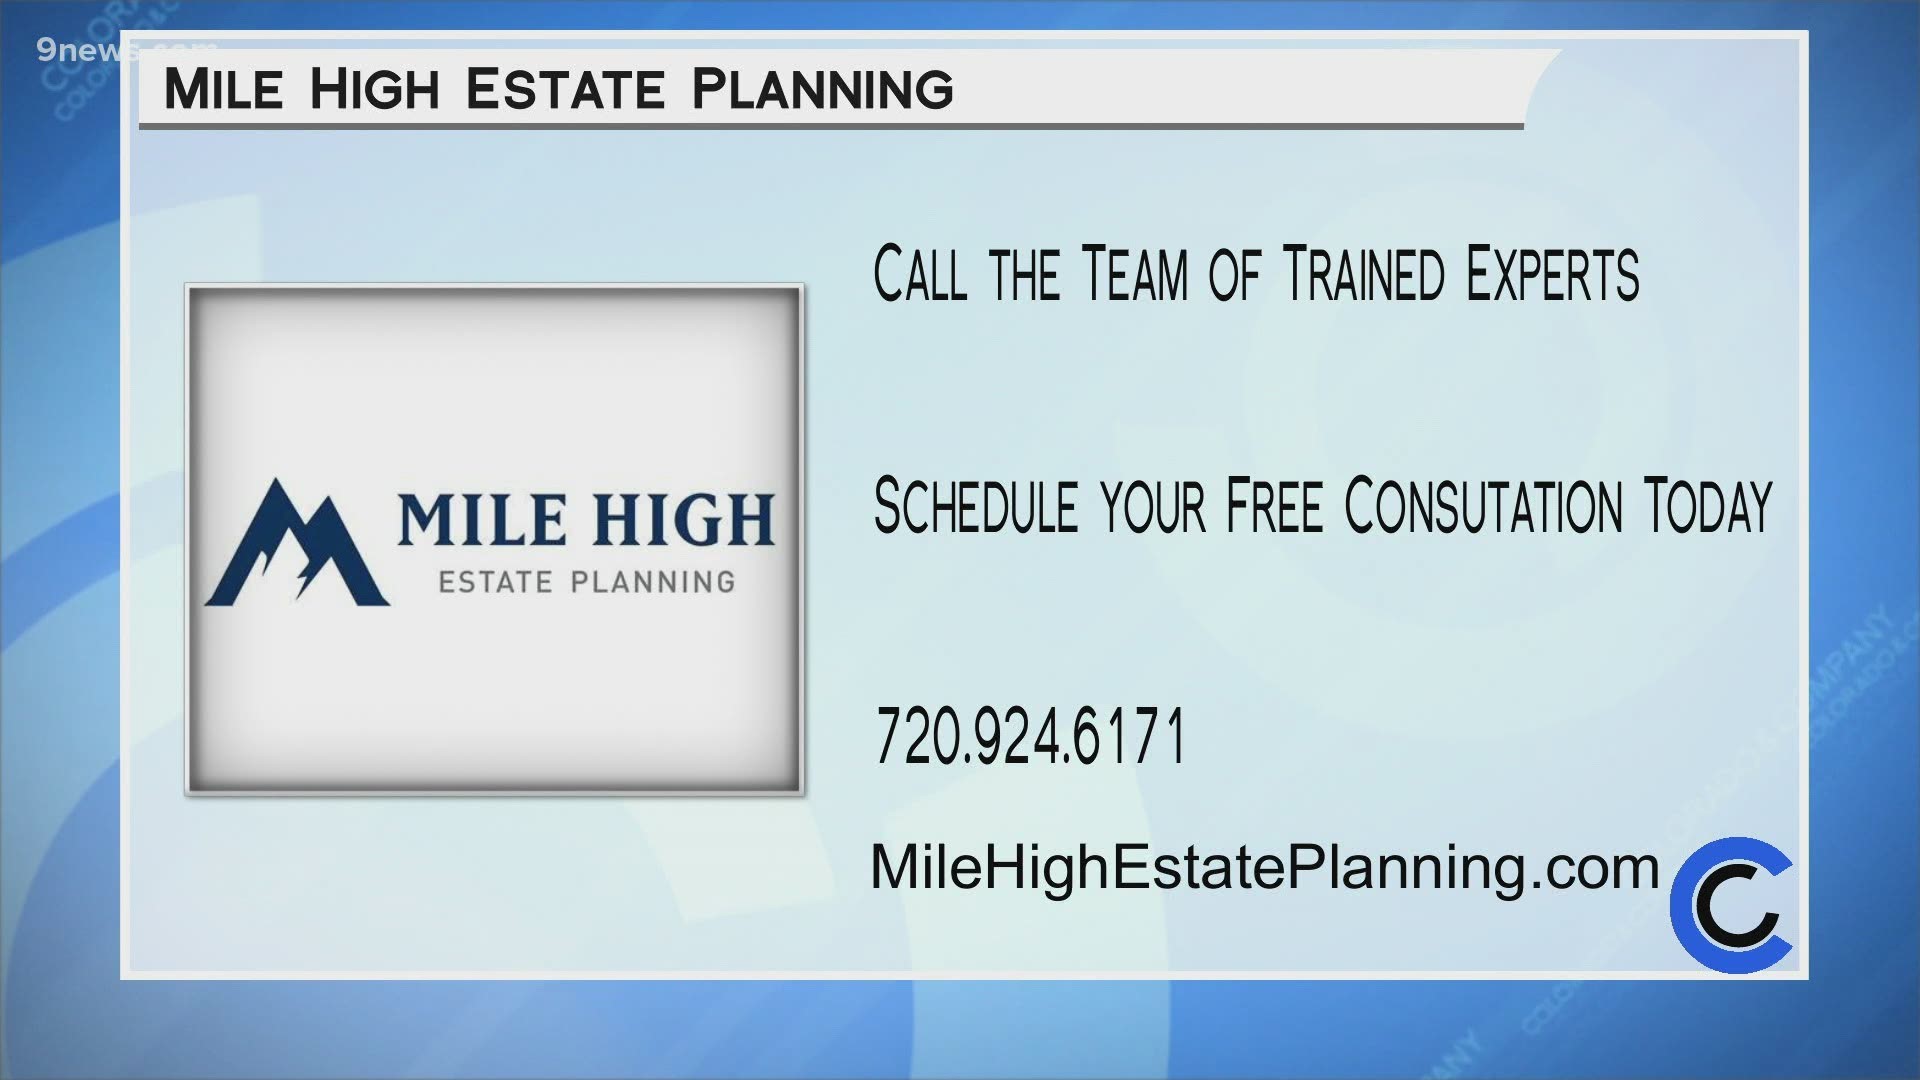 Call 720.924.6171 and let Blake and his team walk you through the estate planning process. Schedule your free consultation today at MileHighEstatePlanning.com.